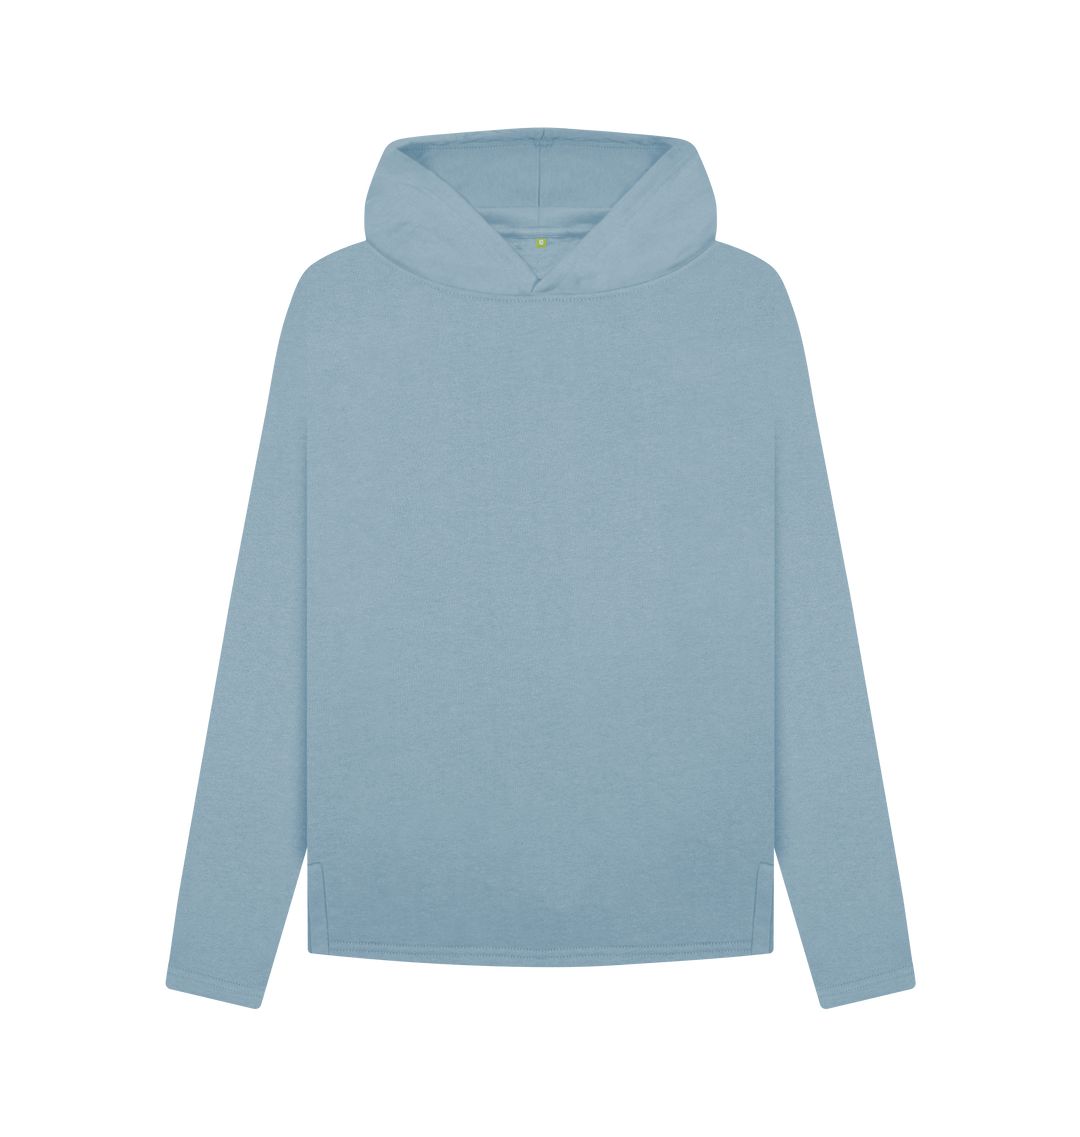 Stone Blue Women's organic cotton relaxed fit hoodie